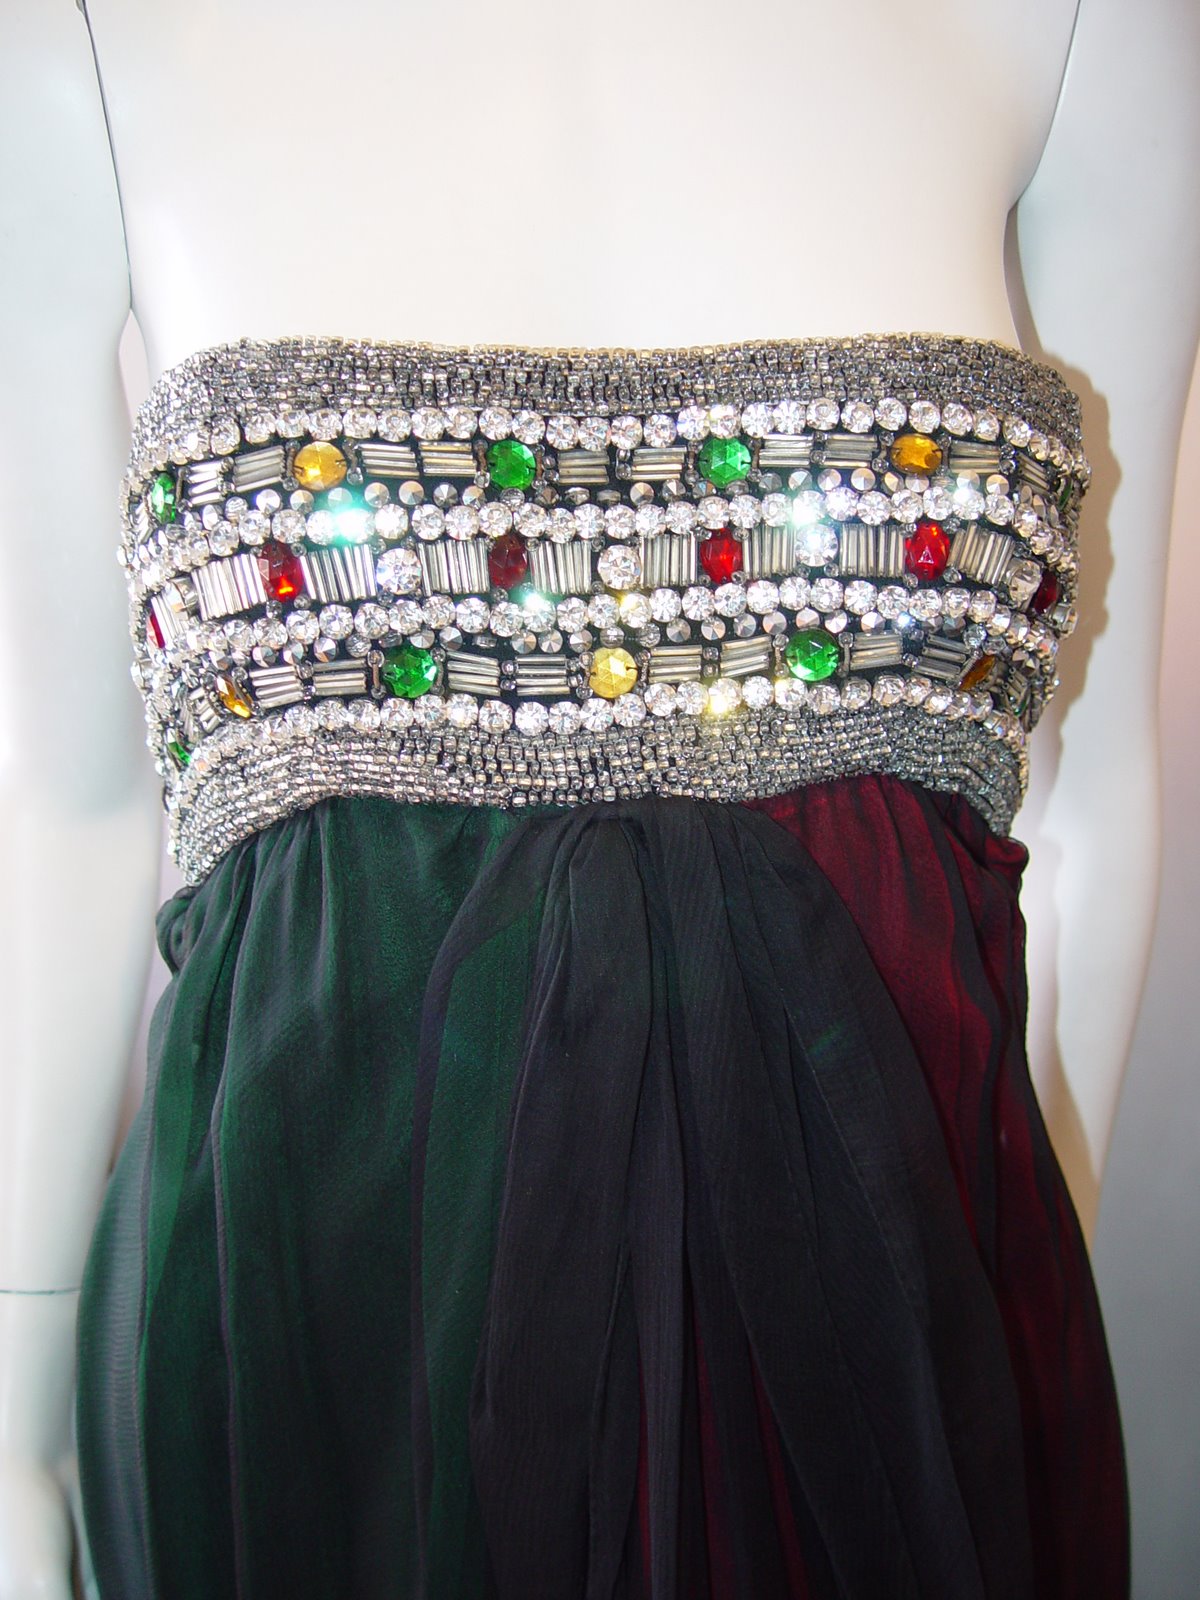 [GALANOS+HOLIDAY+DRESS+IN+GREEN+&+RED+W+JEWELED+PANEL+(4).JPG]